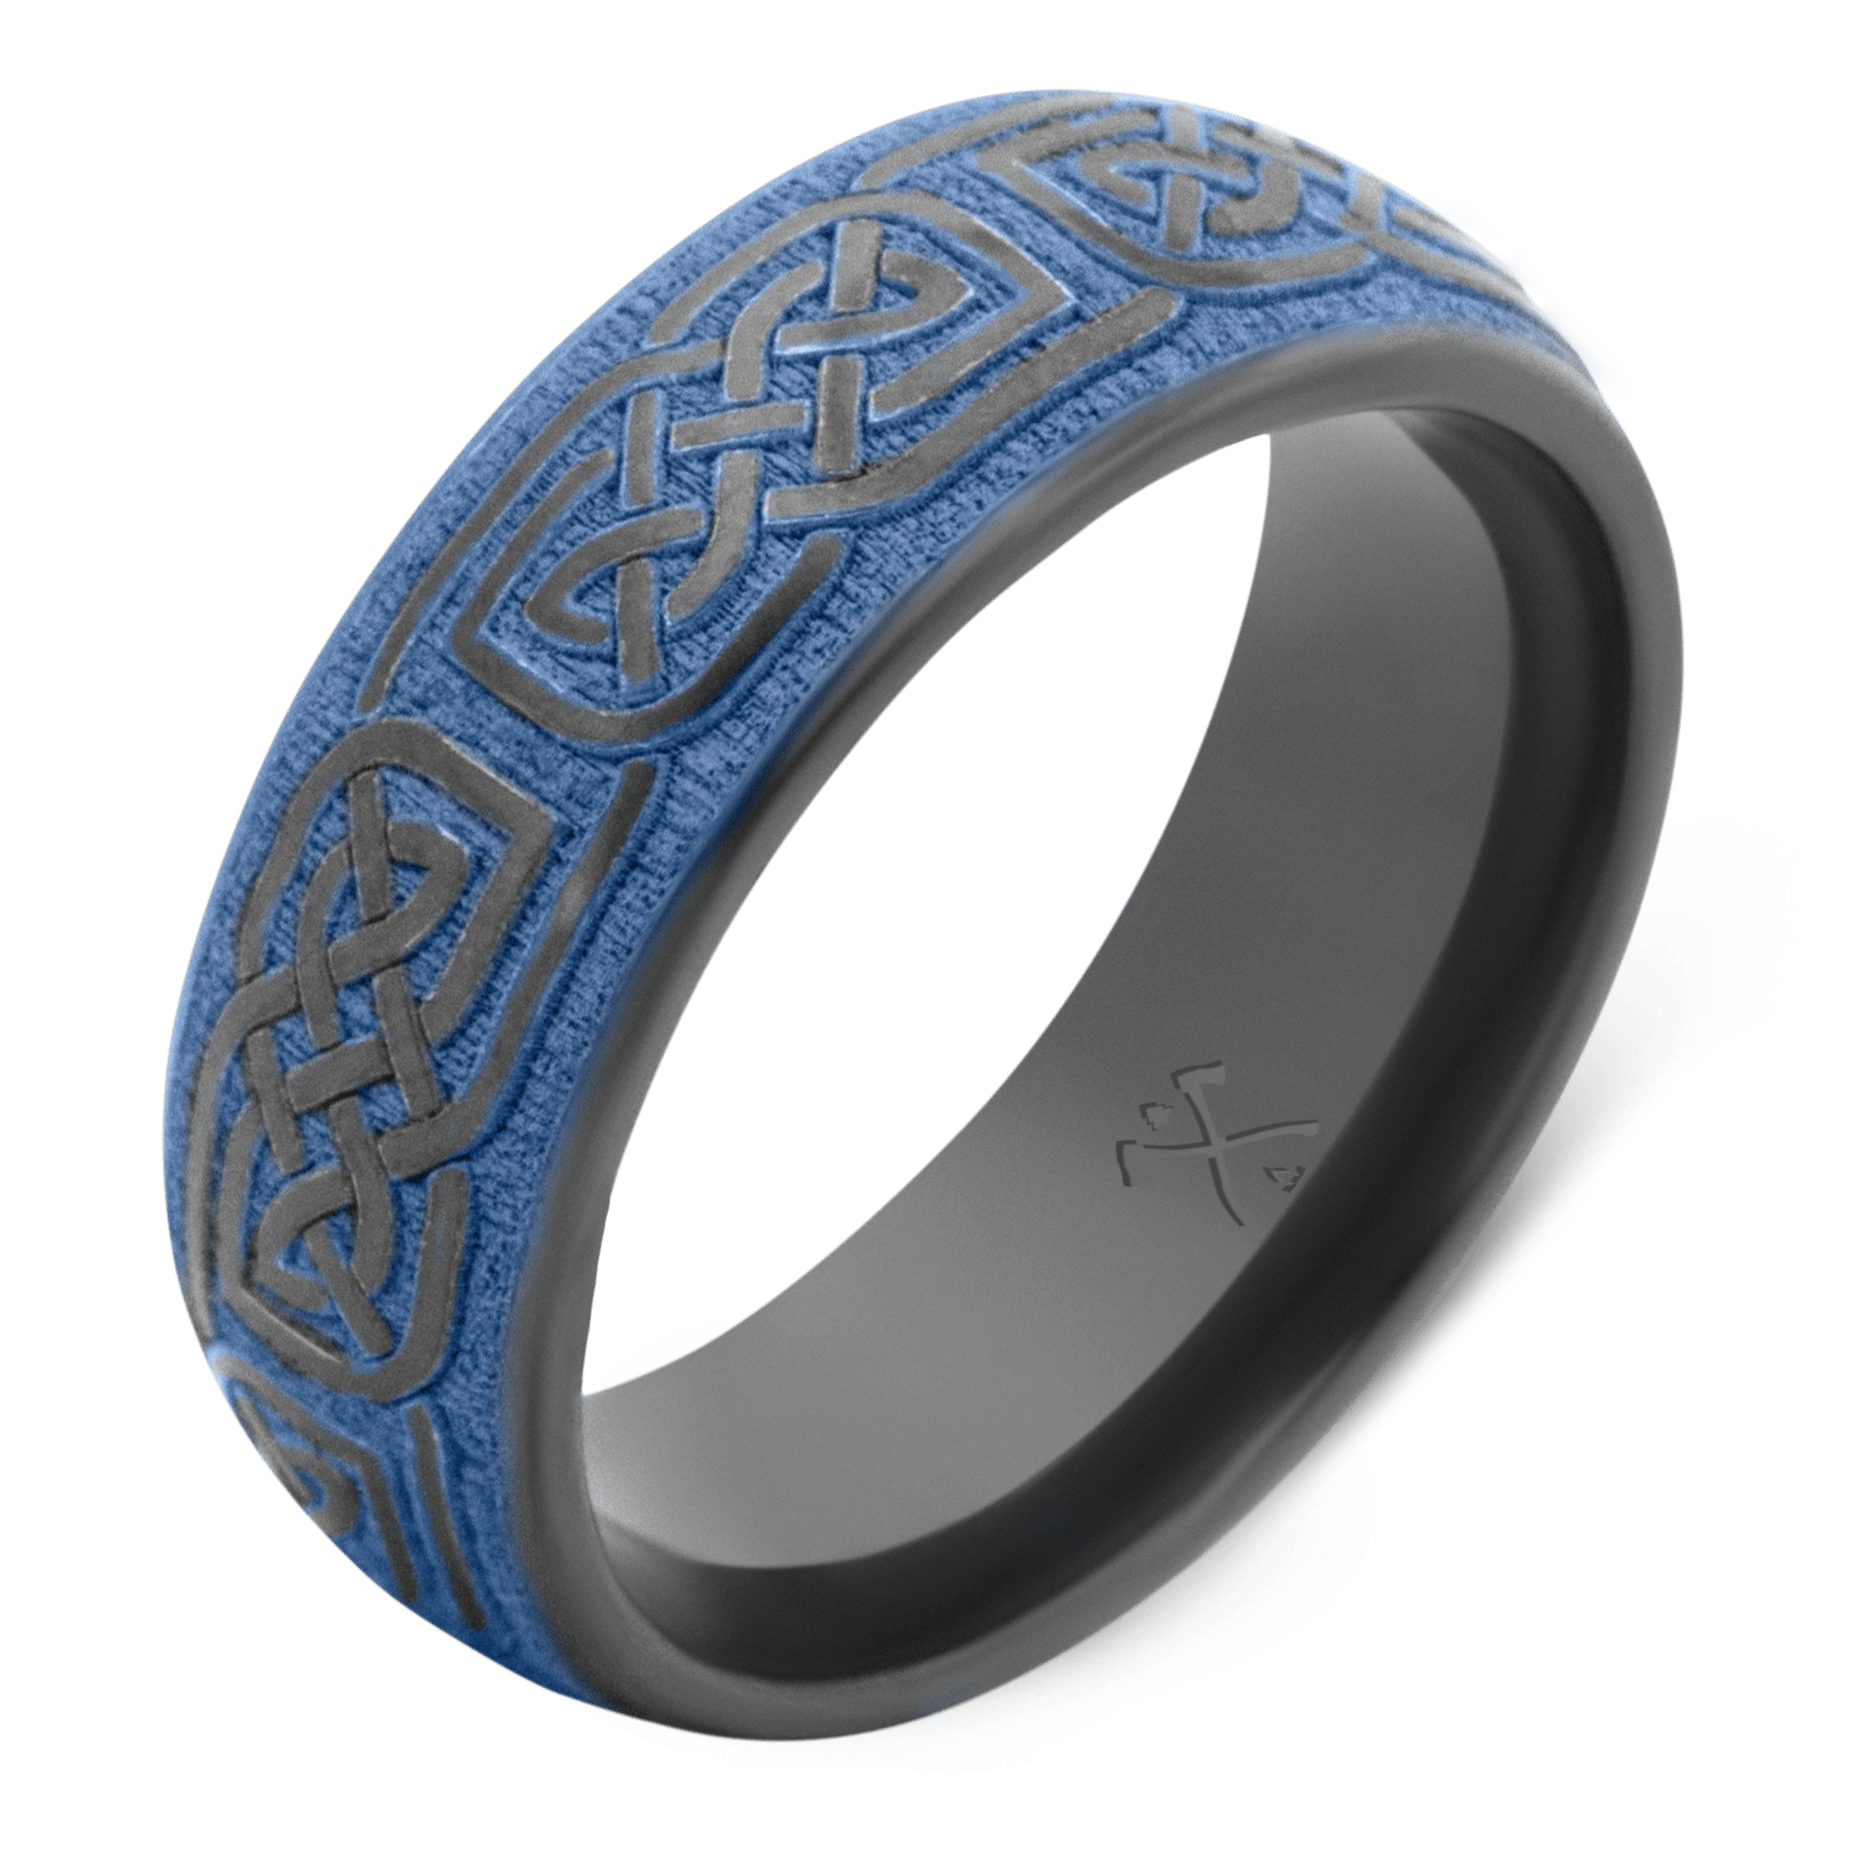 Celtic Tungsten Ring | Just Rings Australia Free Express Post